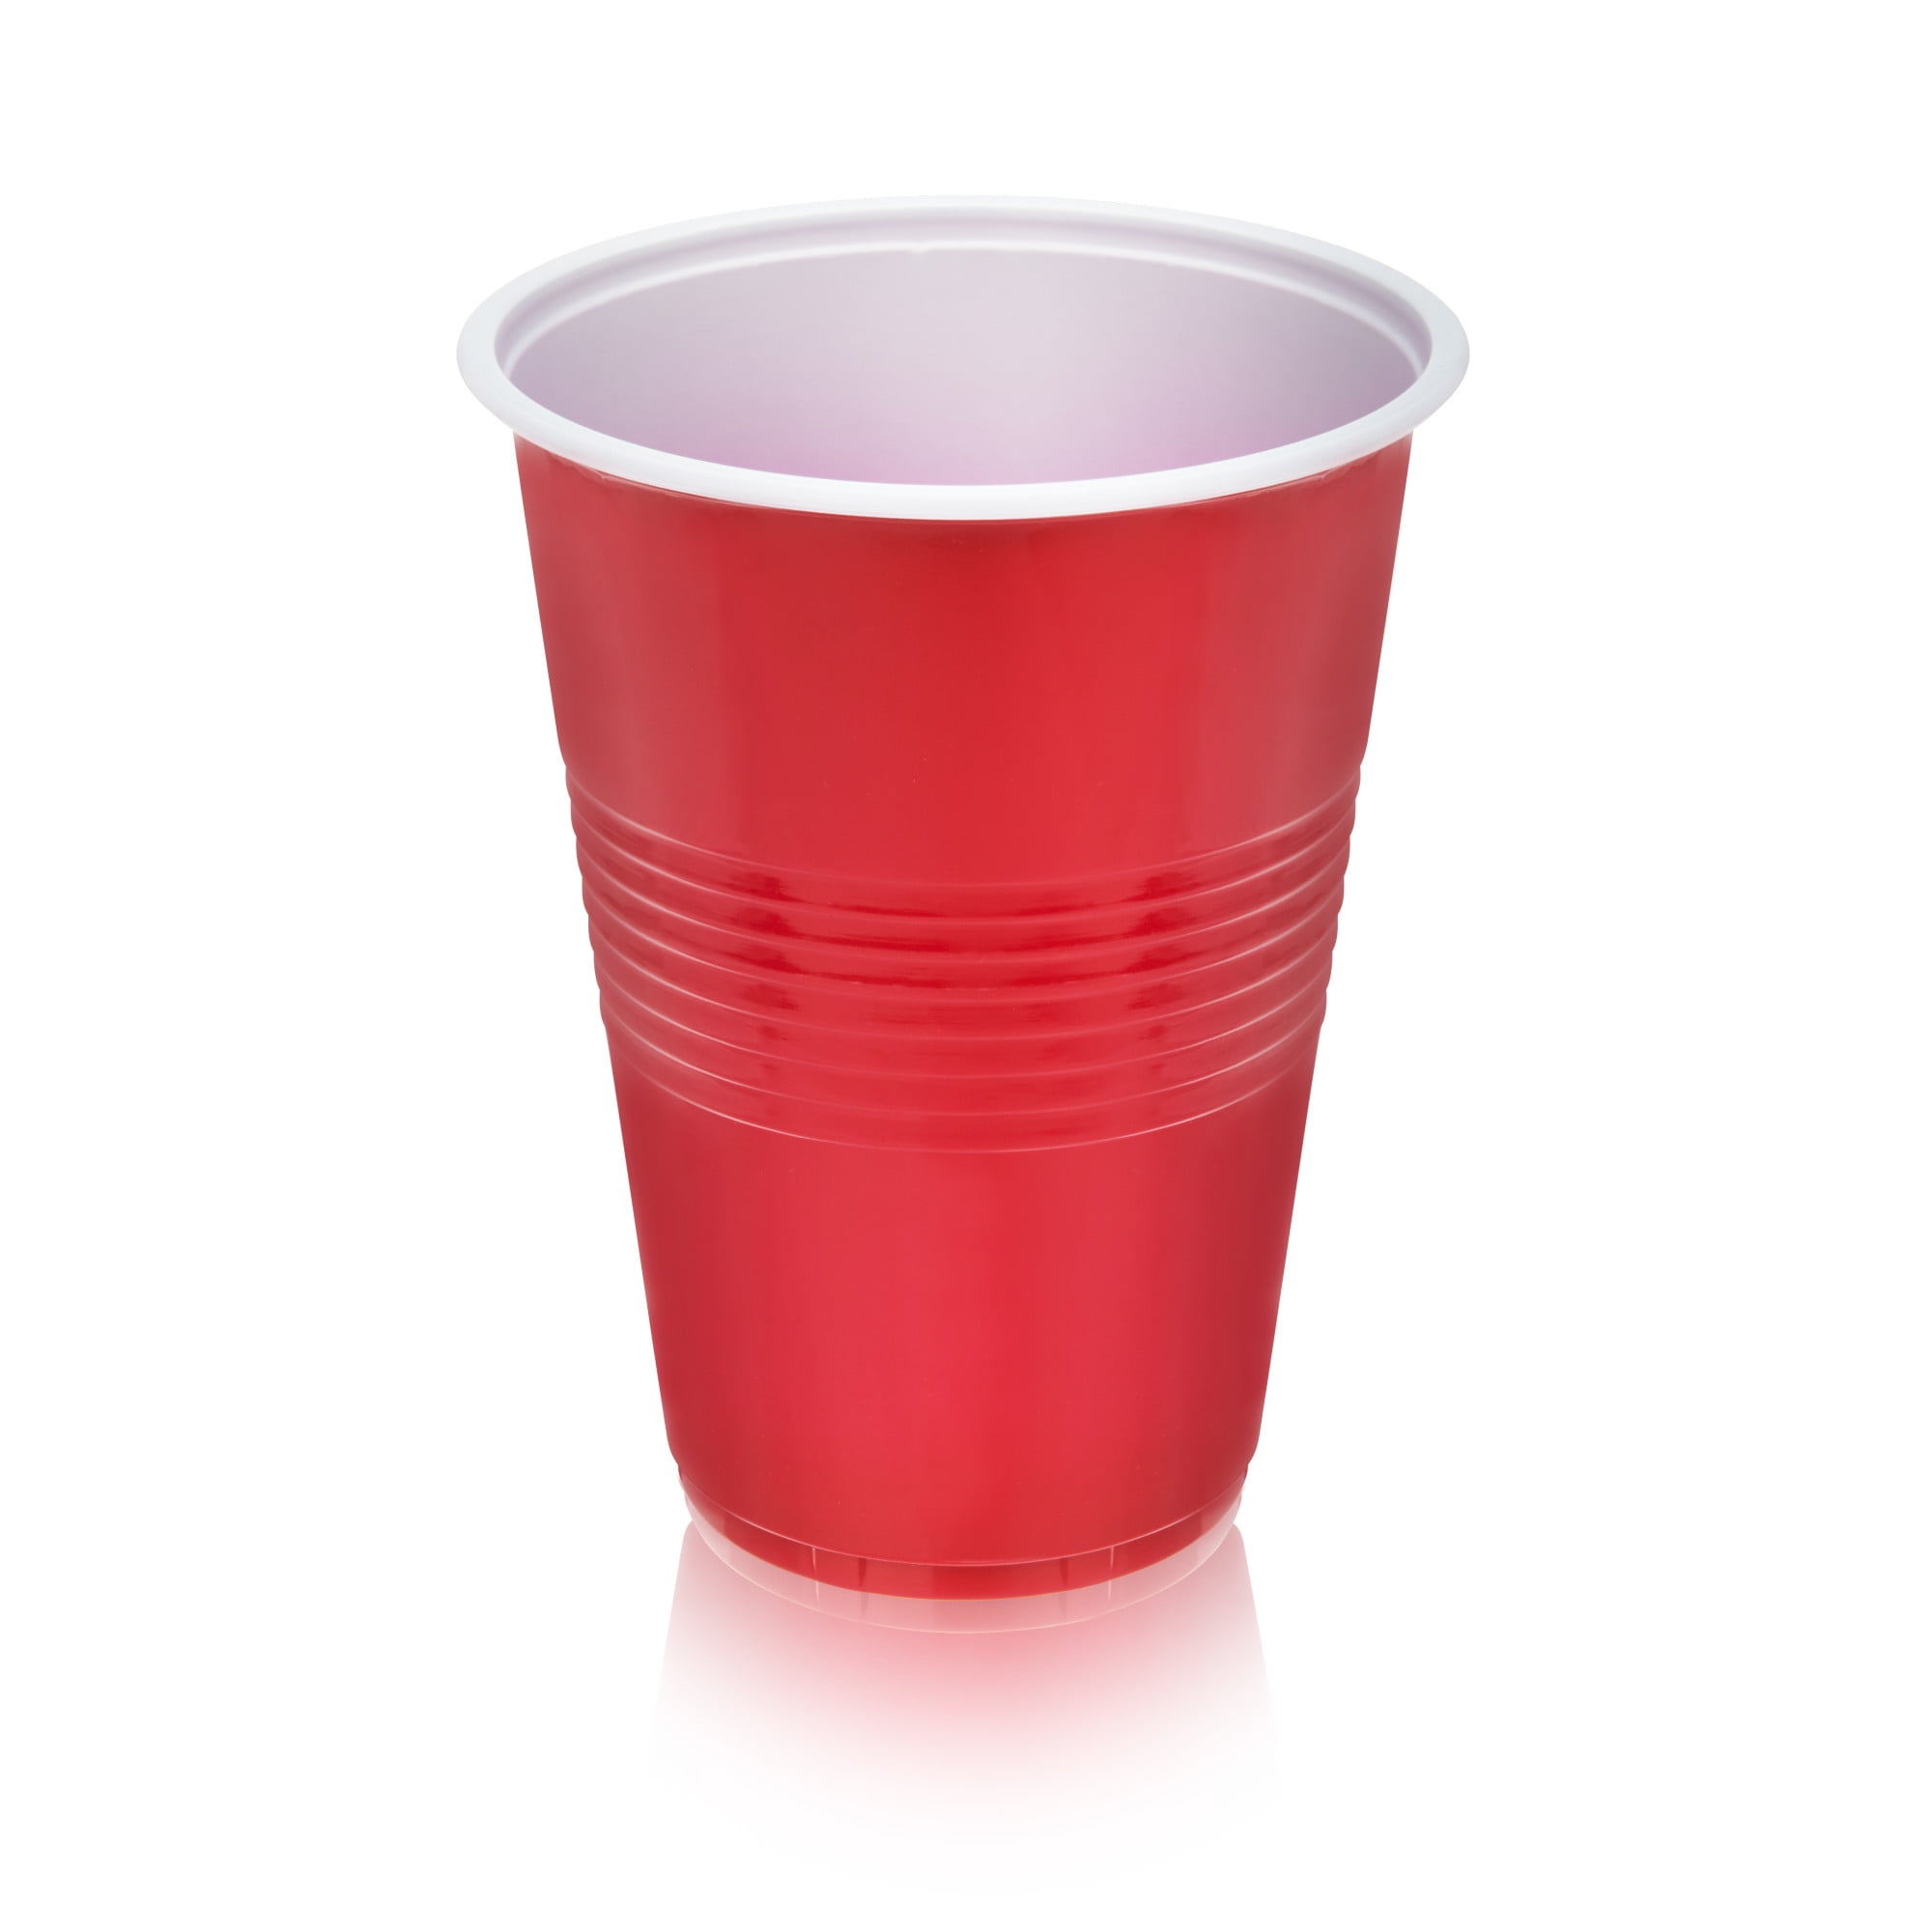 True Party Cups, Disposable Cups, Drink Cocktails and Beer, 16 Ounce Capacity, Plastic, Red, of 50 - Walmart.com